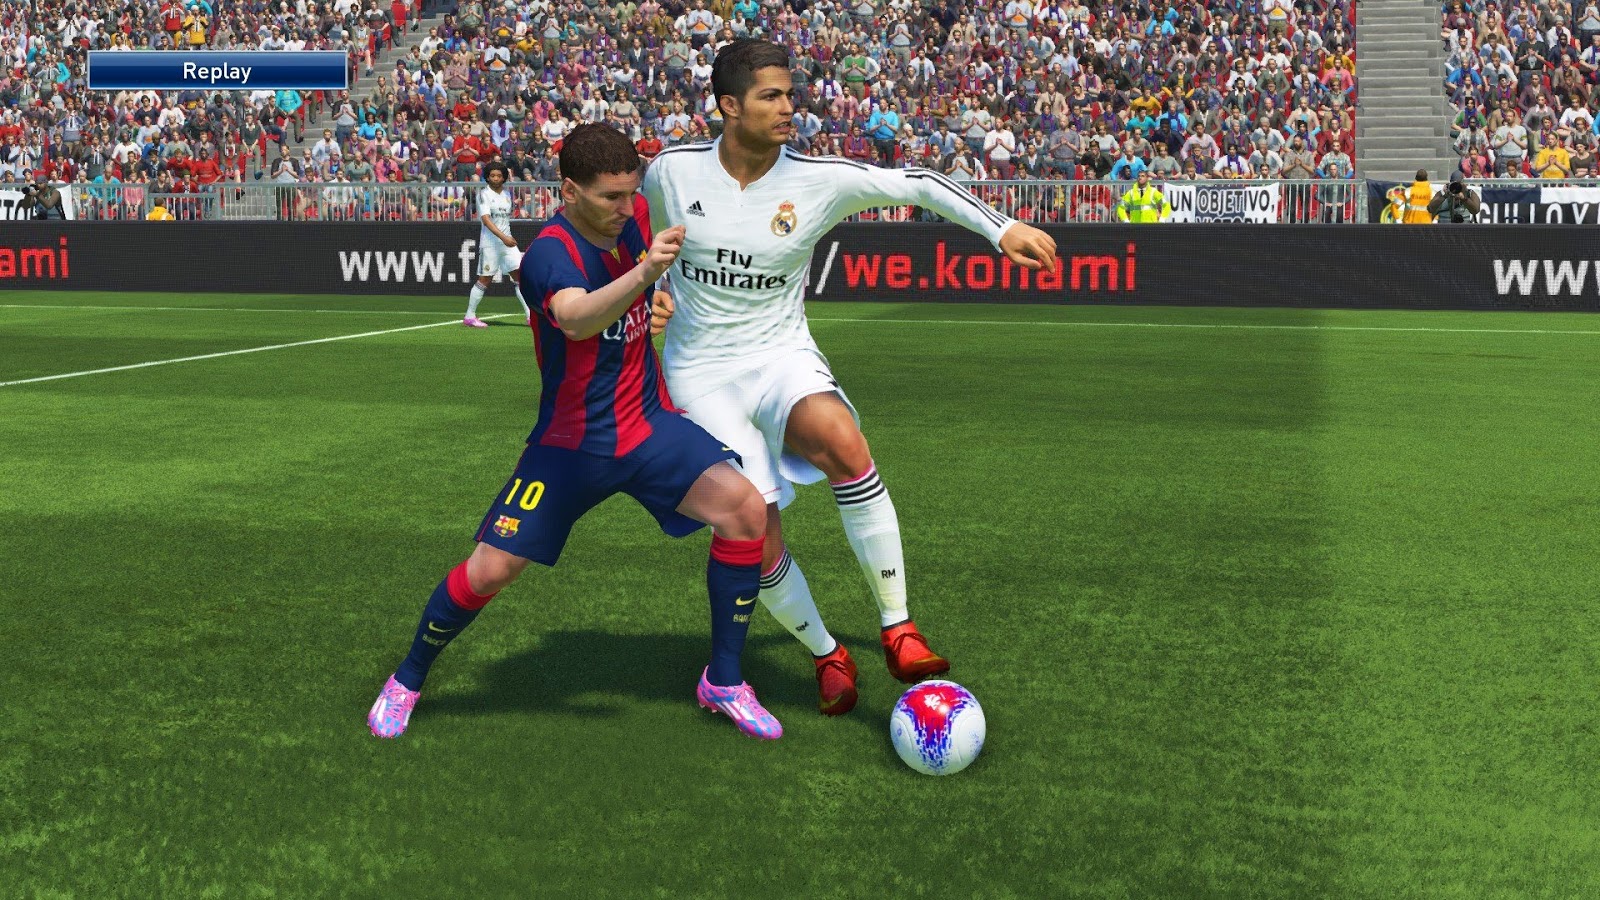 Pes 2014 free download for pc full version with crack